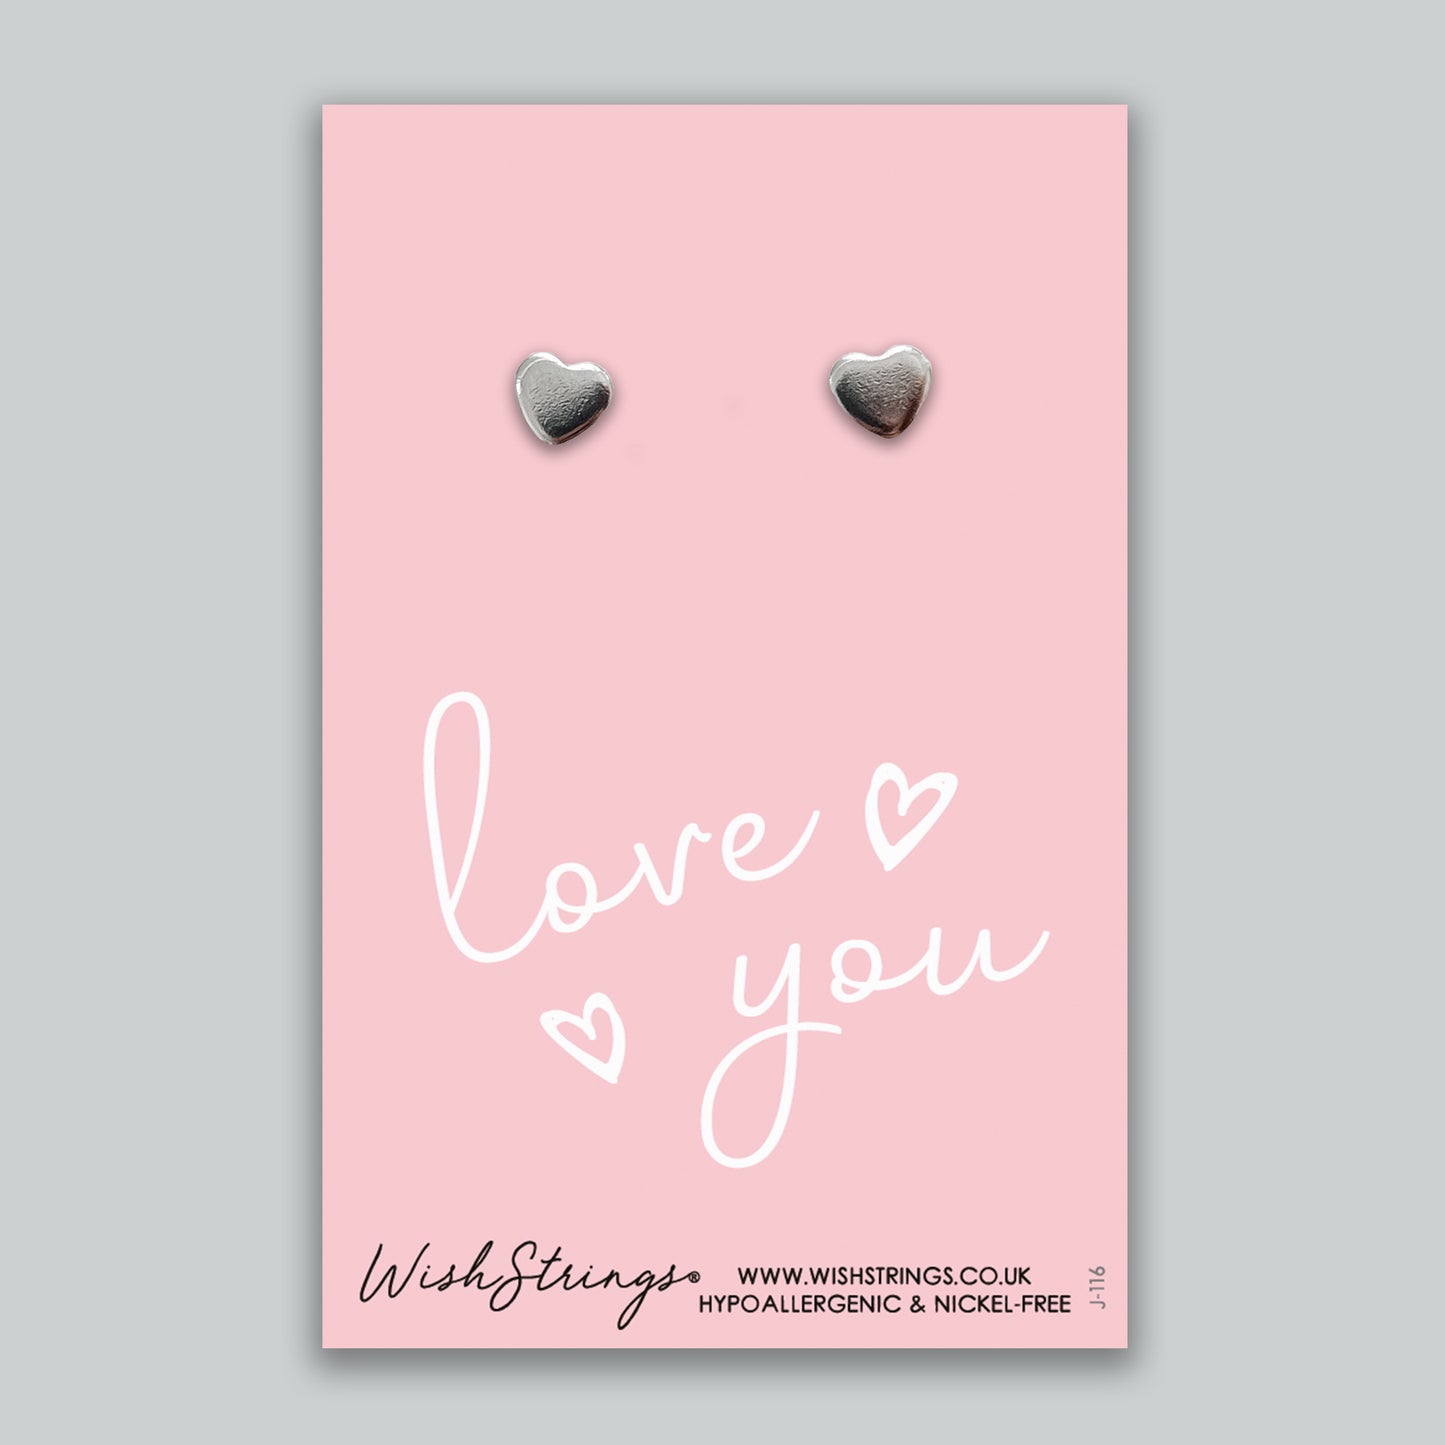 Love You - Silver Heart Stud Earrings | 304 Stainless - Hypoallergenic